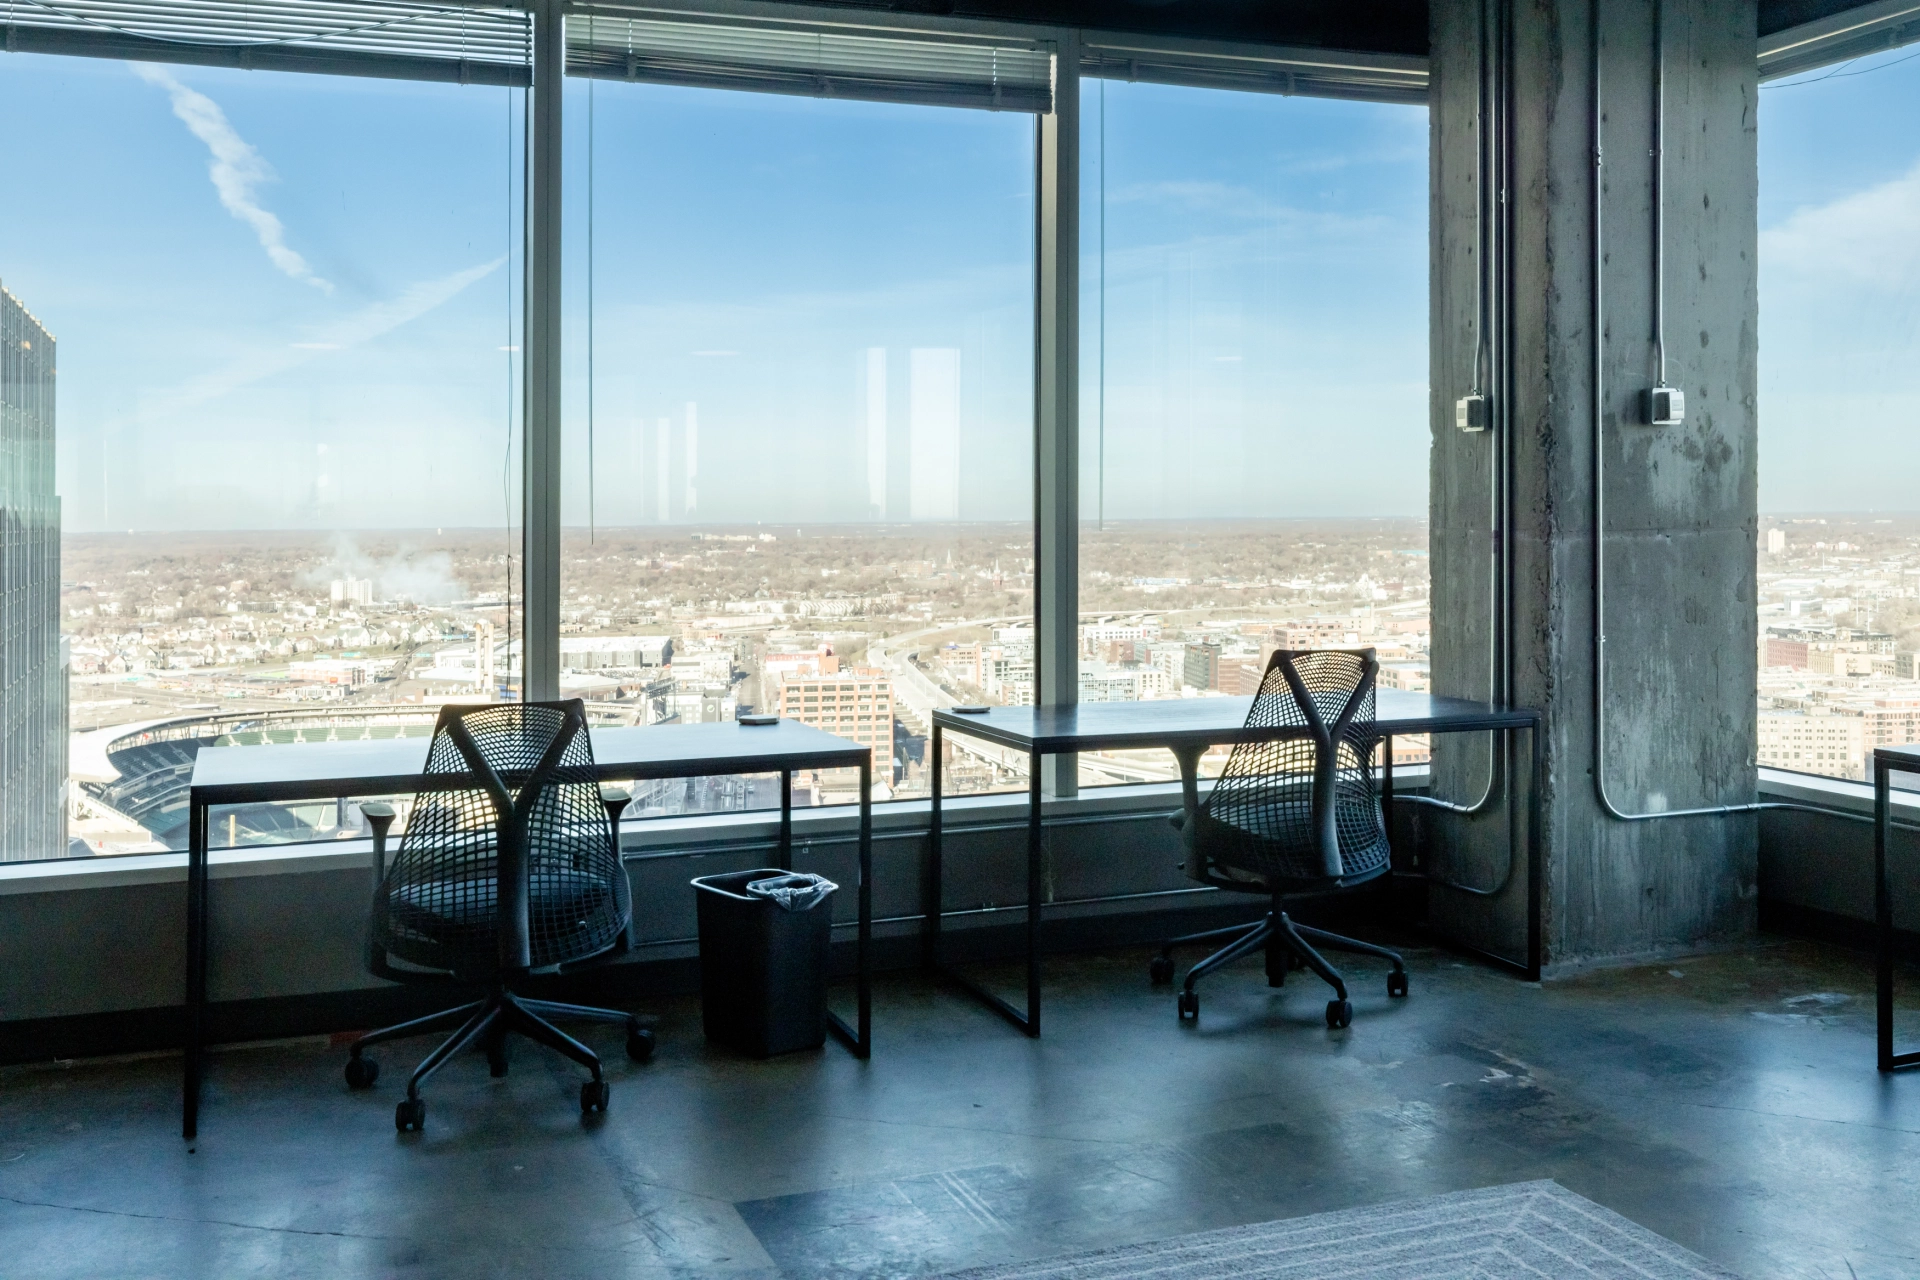 Minneapolis coworking office with large windows overlooking the city.